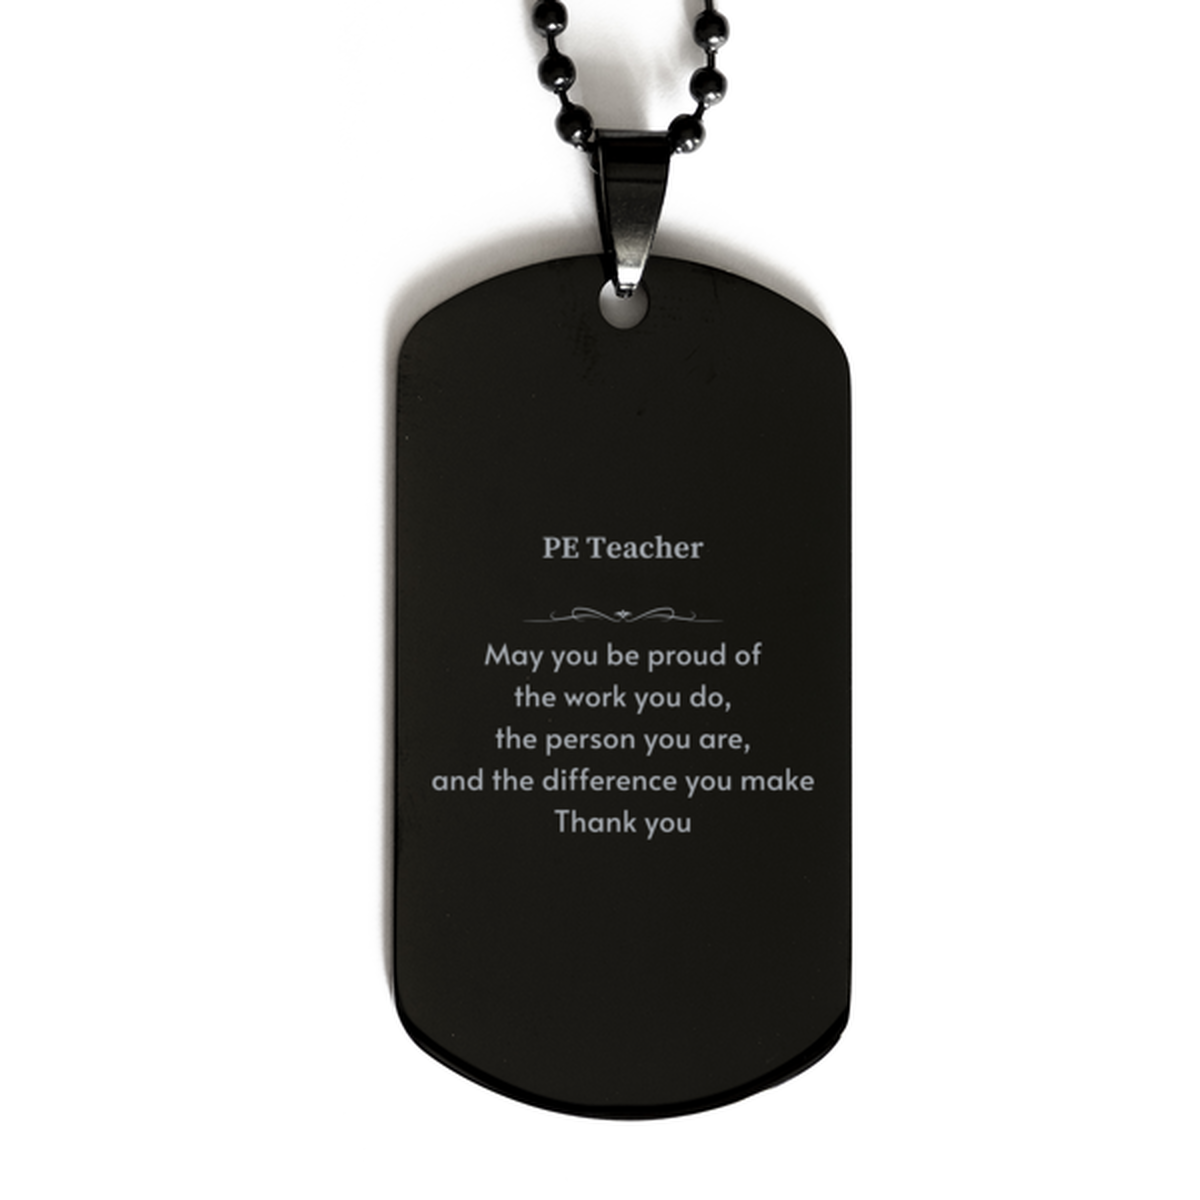 Heartwarming Black Dog Tag Retirement Coworkers Gifts for PE Teacher, PE Teacher May You be proud of the work you do, the person you are Gifts for Boss Men Women Friends